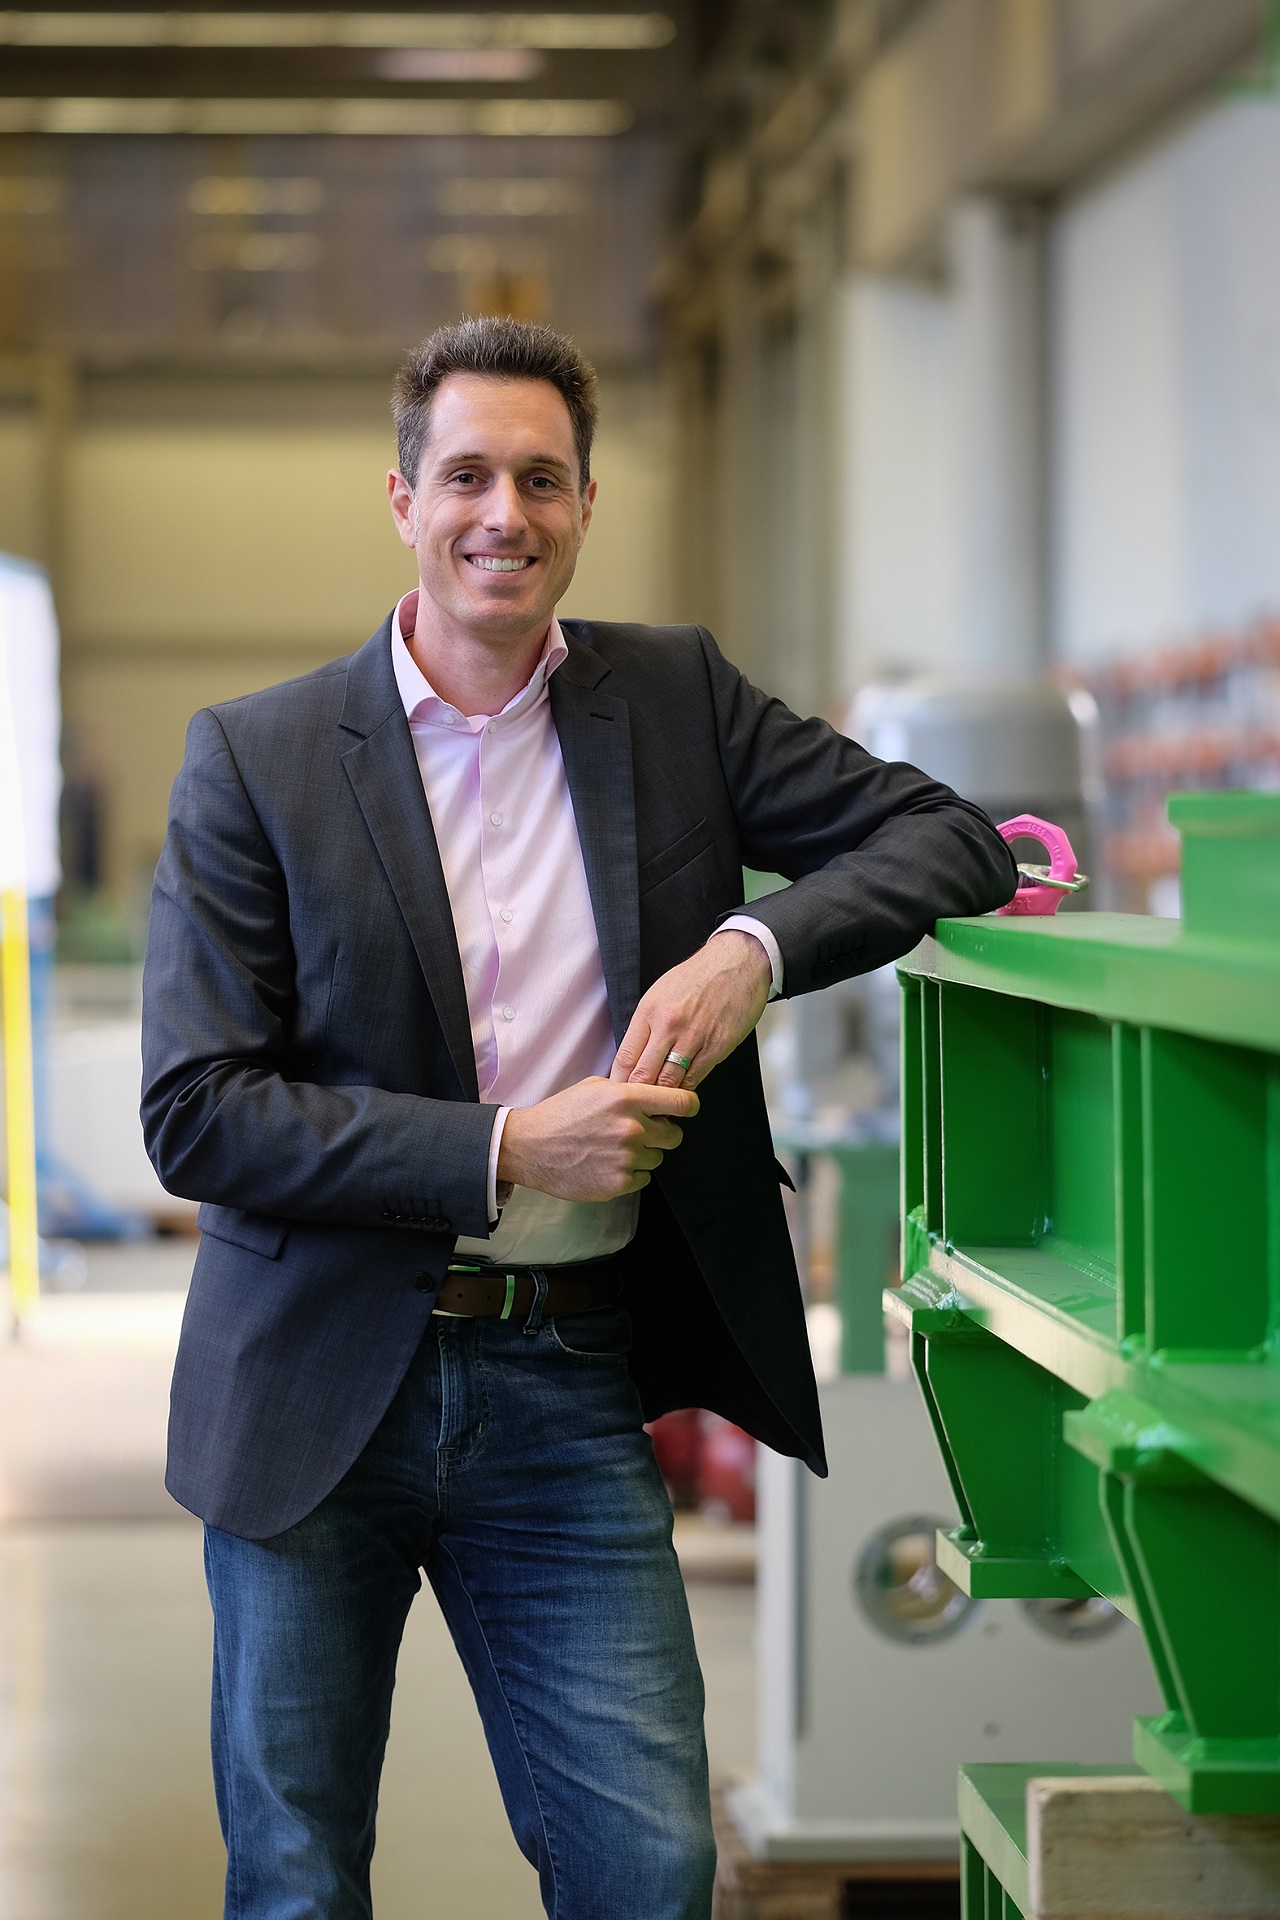 Fabian Kapp, Managing Director of Graebener Maschinentechnik, is pleased about the high repeatability of the laser, which plays an important role especially in the production of stacks.